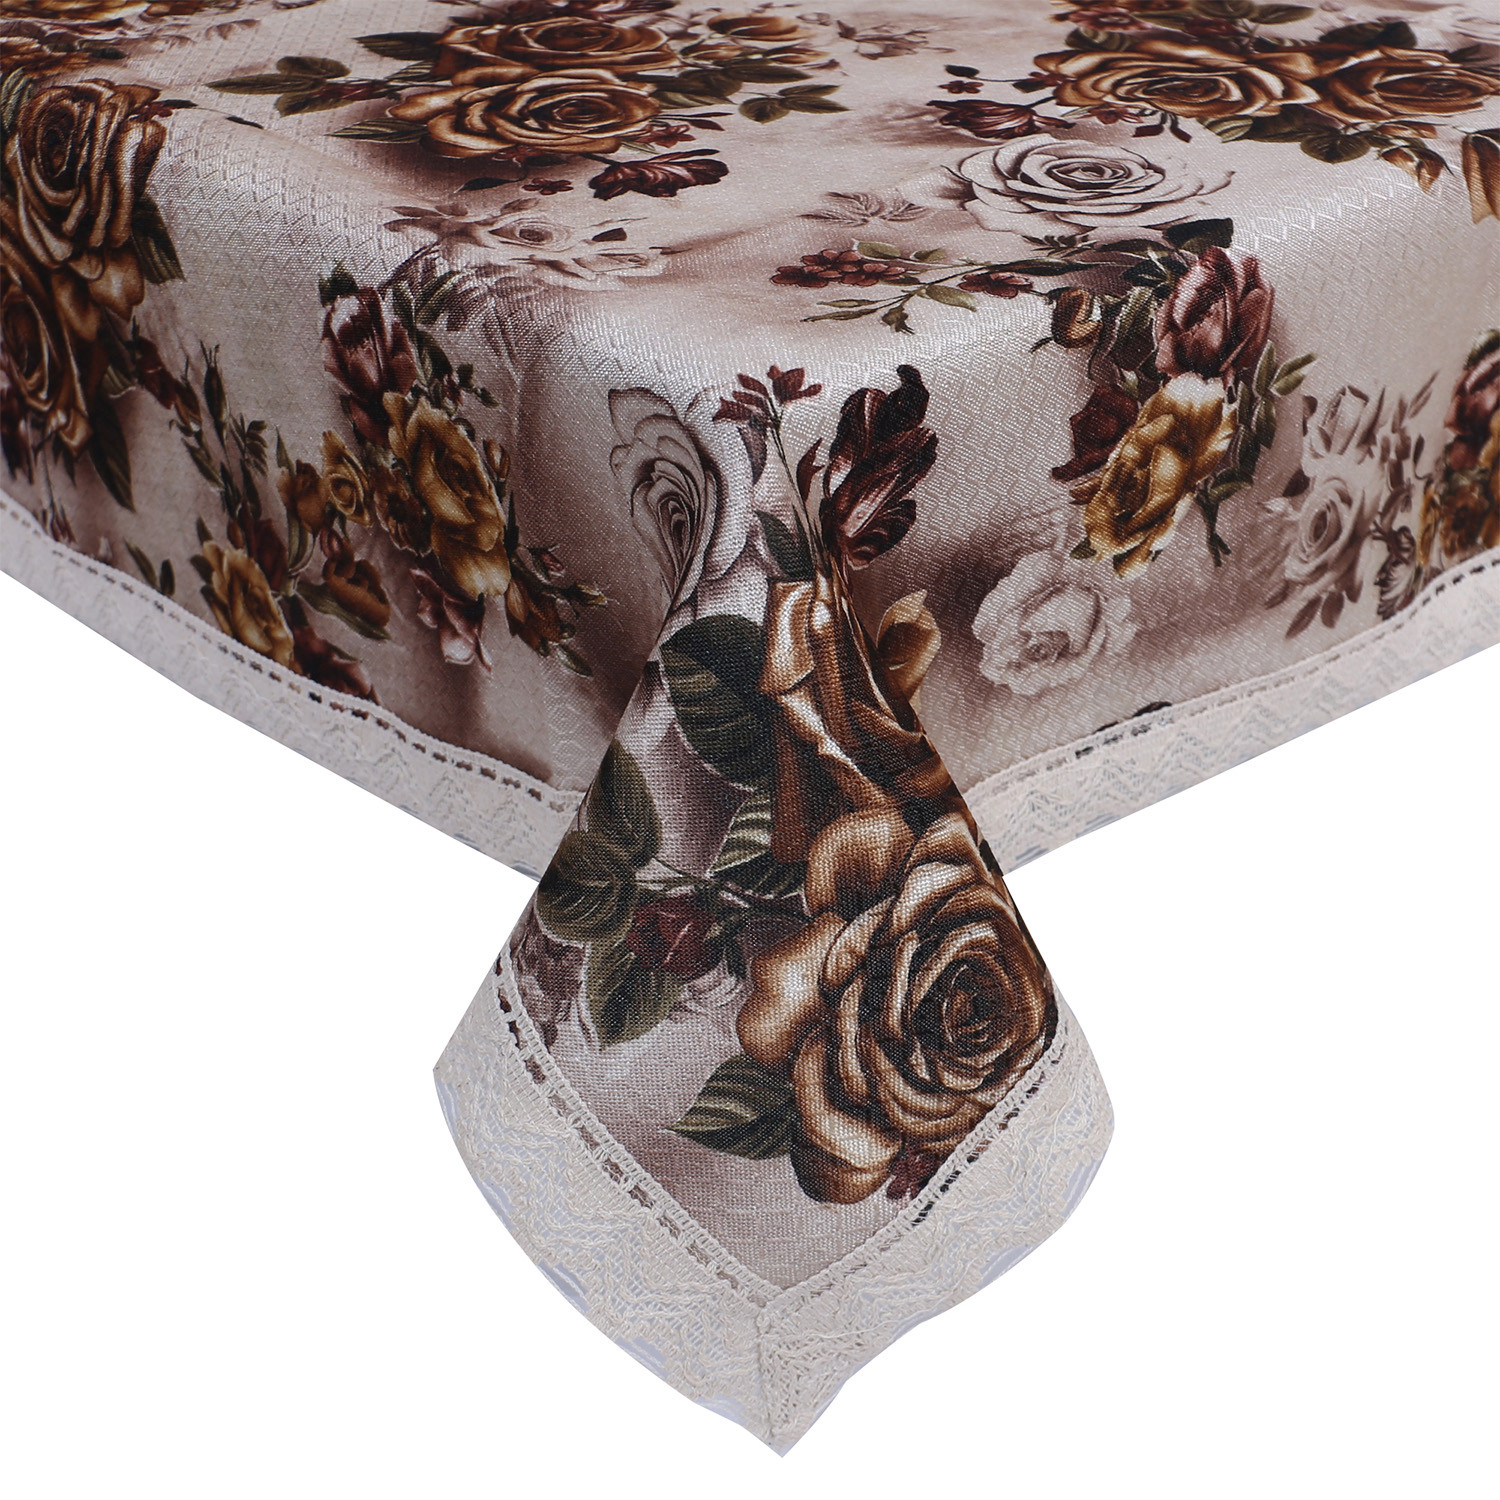 Kuber Industries Center Table Cover|Luxurious Gold Rose Pattern Faux Silk Tablecloth|Slip Resistant Protector Table Top Cover With Jutelace Border, 40x60 Inch (Gold)